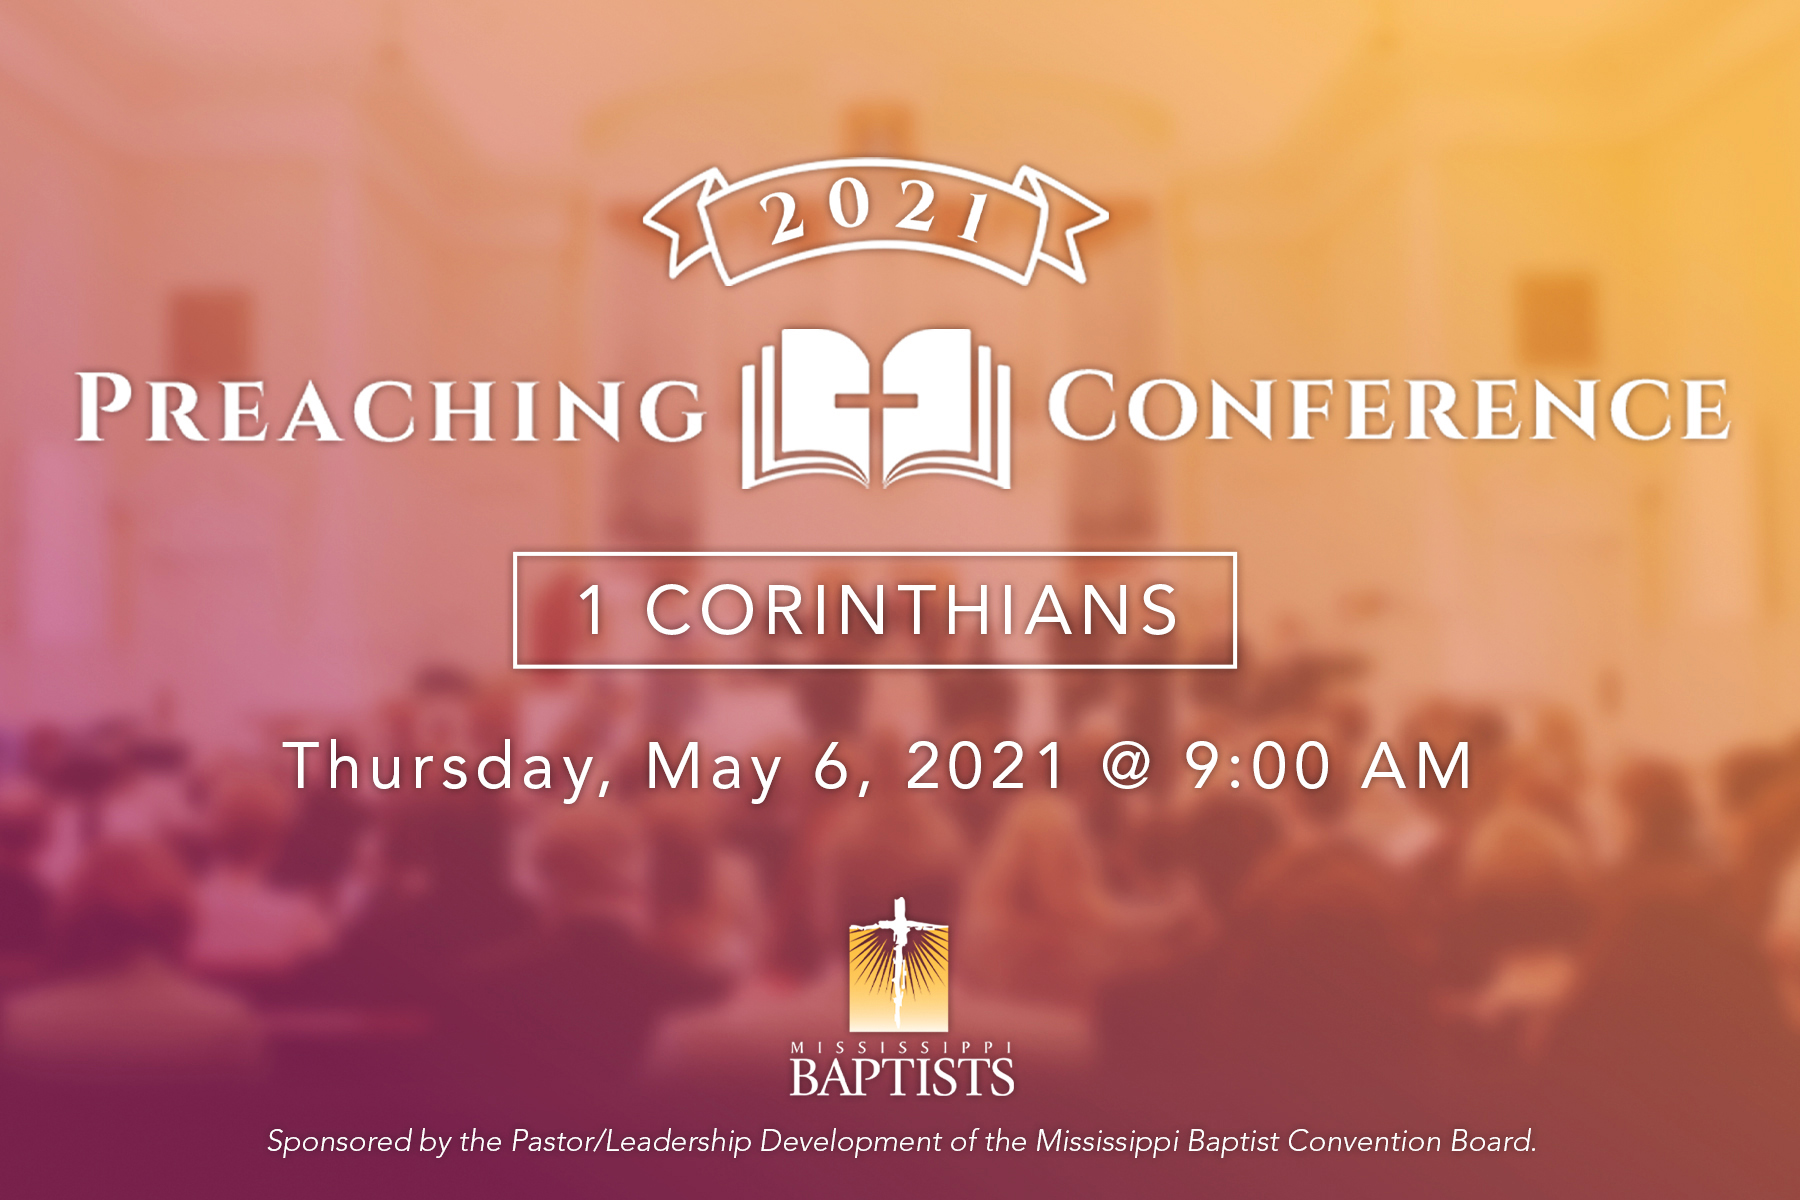 Annual MBCB Preaching Conference set for May 6 via Zoom webinar